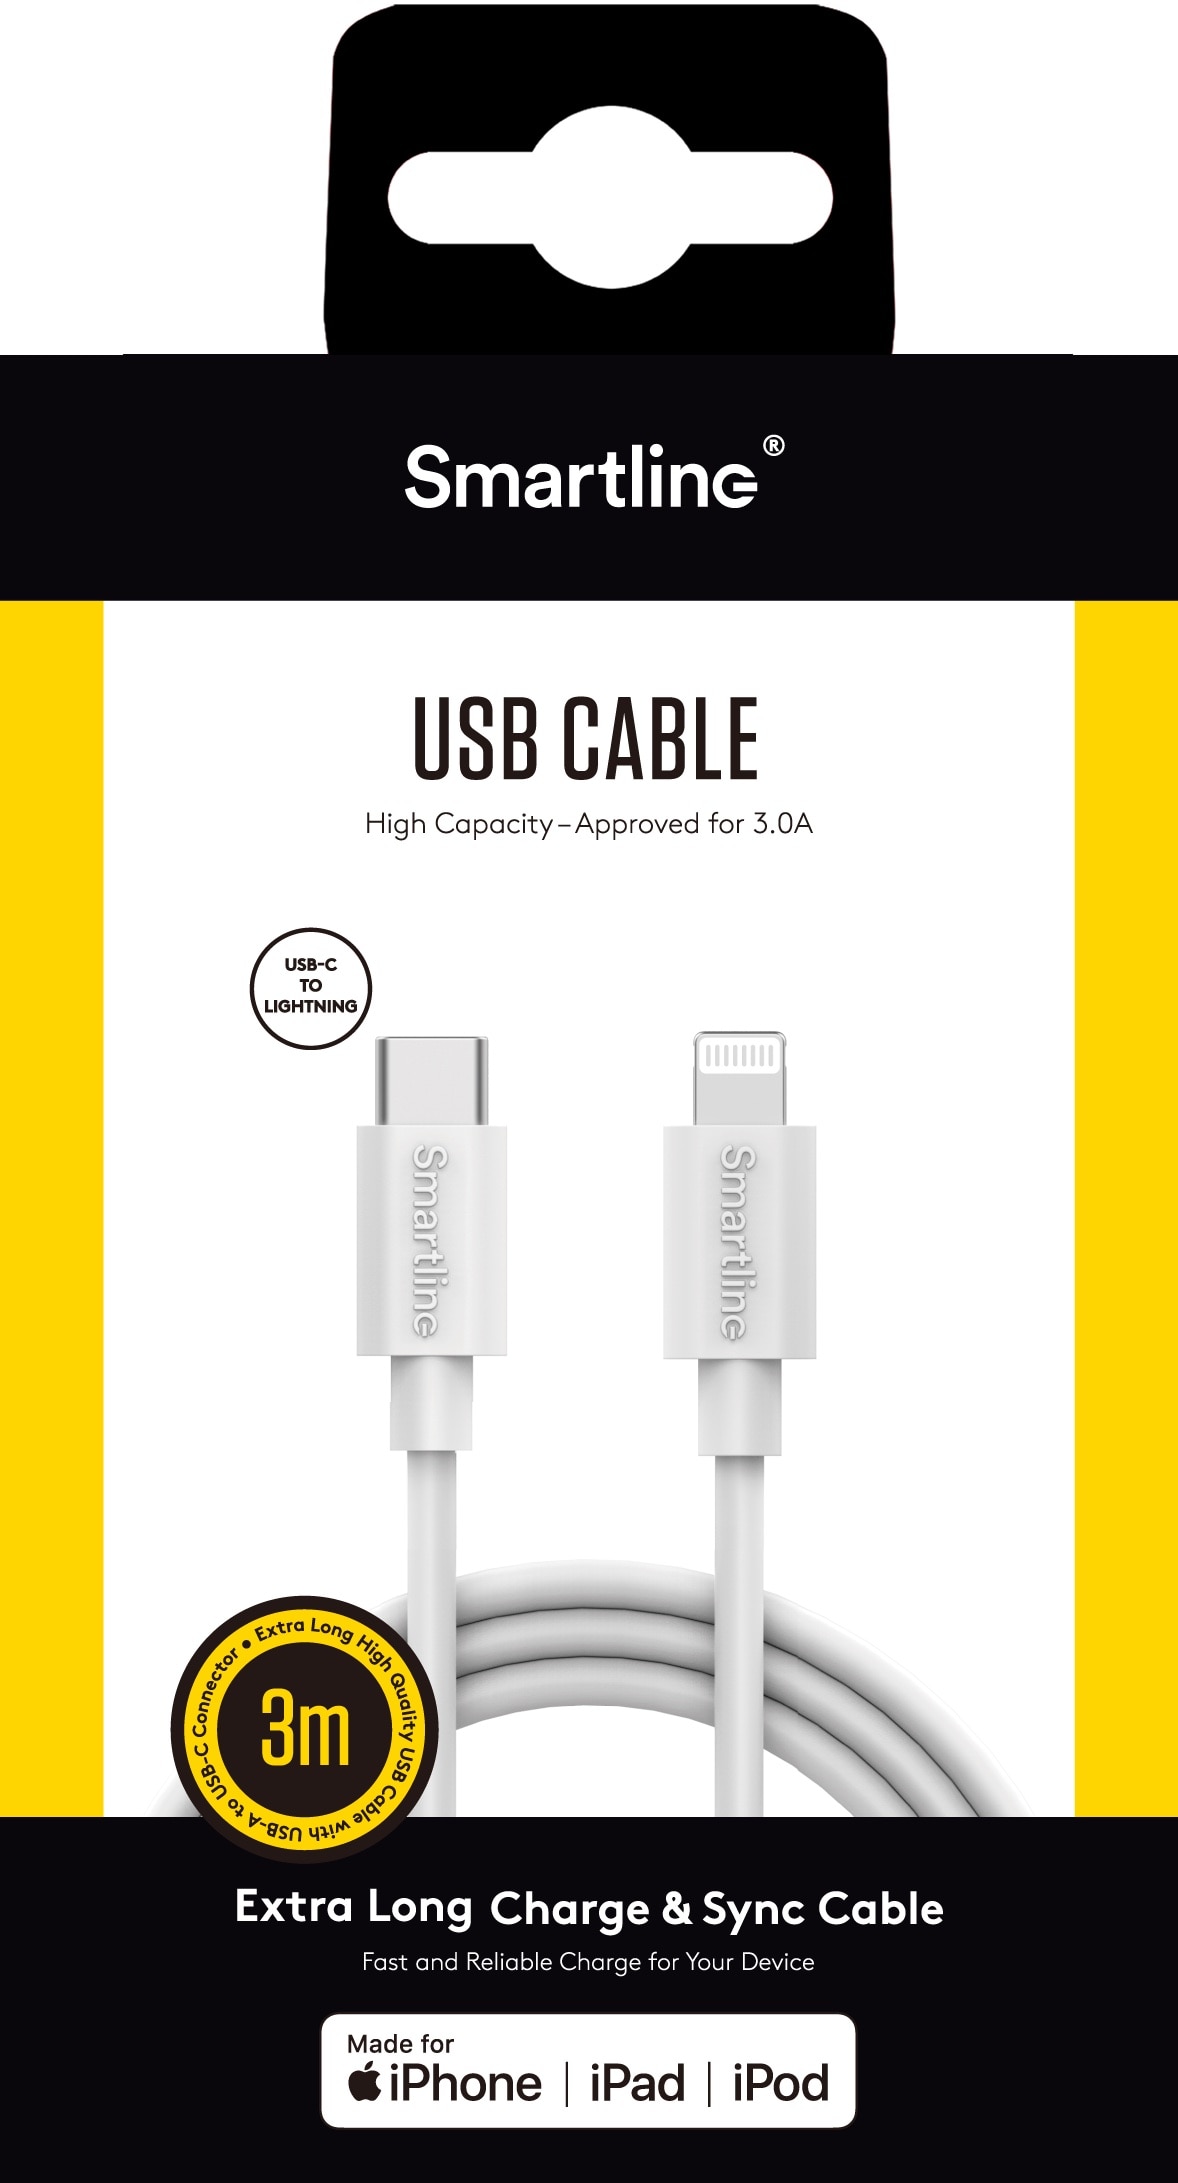 USB Cable USB-C to Lightning 3m valkoinen